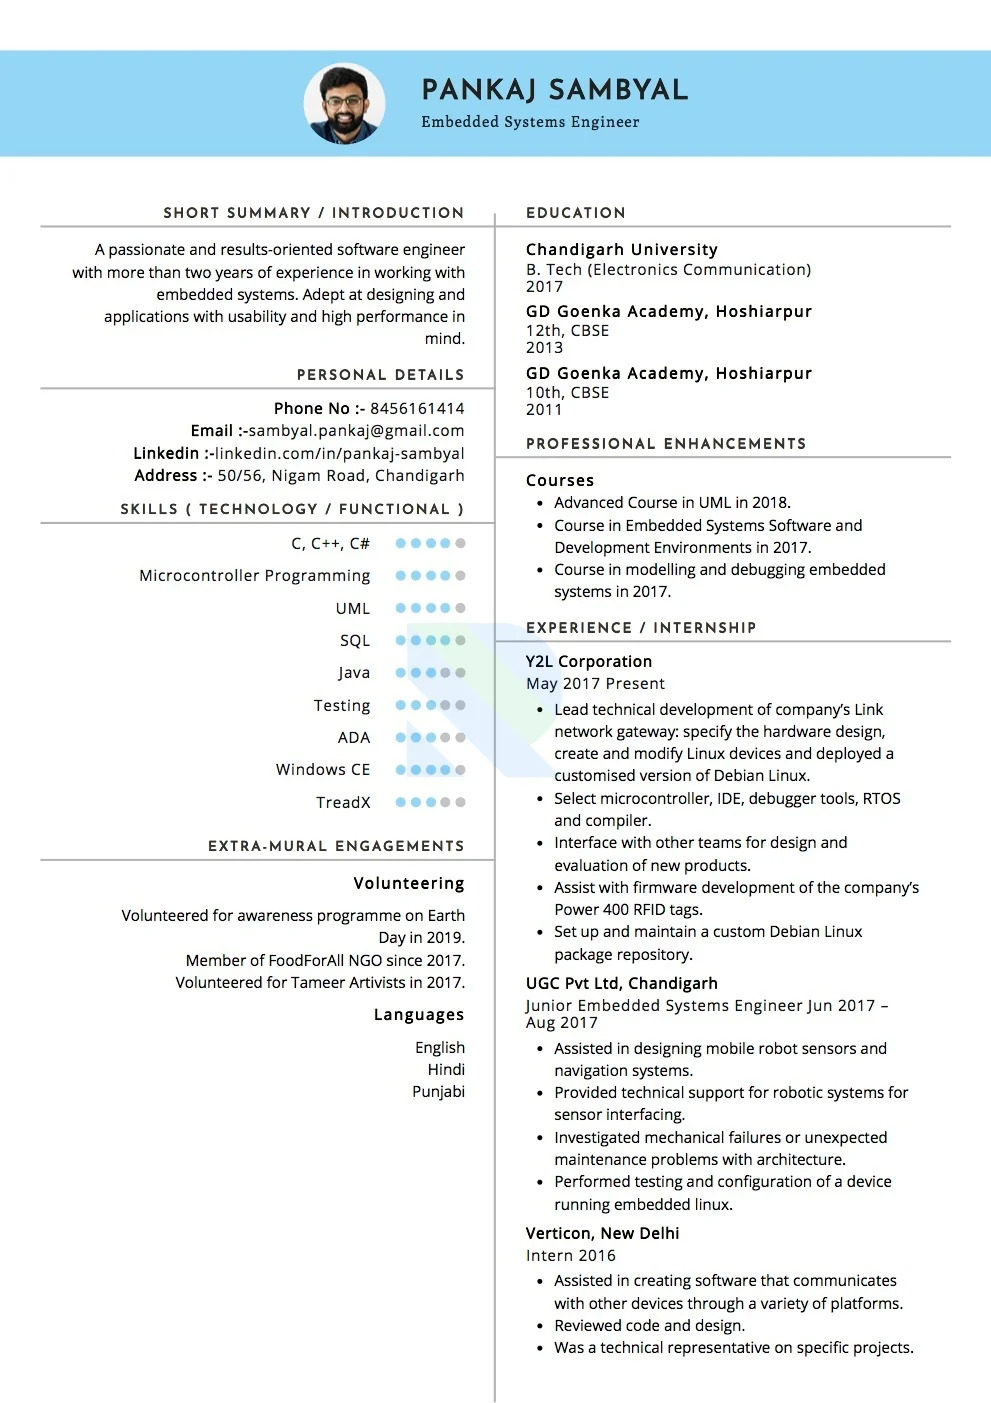 Sample Resume of Embedded Systems Engineer  | Free Resume Templates & Samples on Resumod.co